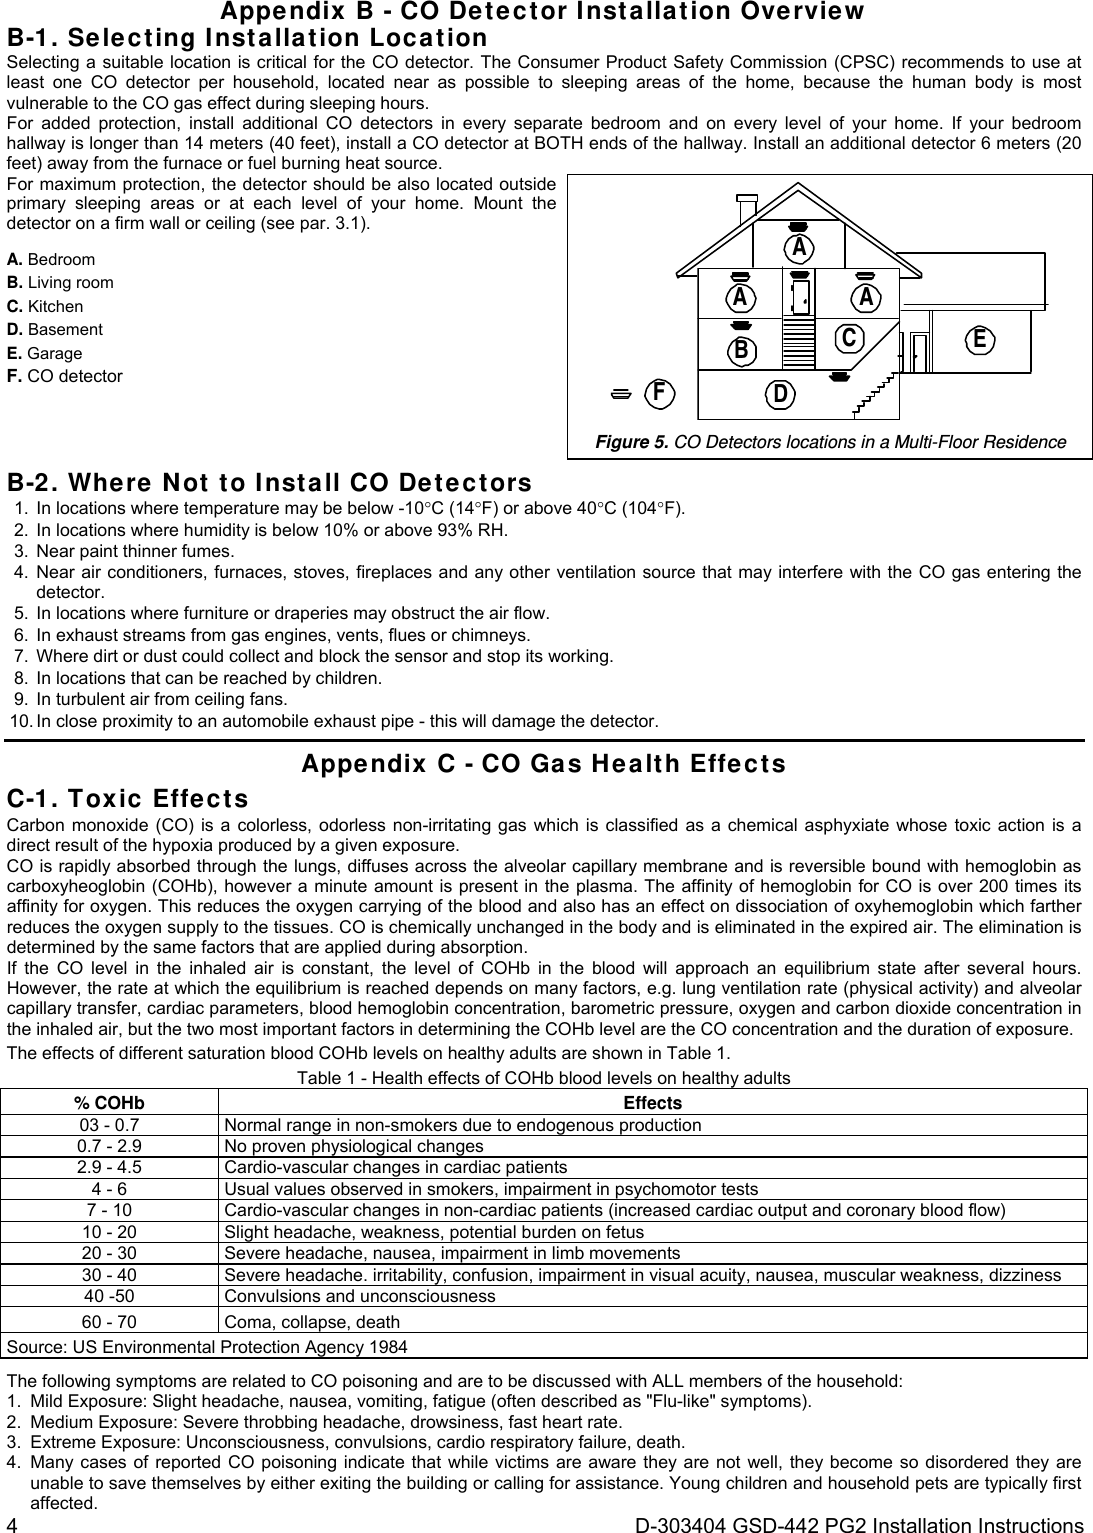 4  D-303404 GSD-442 PG2 Installation Instructions Appendix B - CO Detector Installation Overview B-1. Selecting Installation Location Selecting a suitable location is critical for the CO detector. The Consumer Product Safety Commission (CPSC) recommends to use at least one CO detector per household, located near as possible to sleeping areas of the home, because the human body is most vulnerable to the CO gas effect during sleeping hours.  For added protection, install additional CO detectors in every separate bedroom and on every level of your home. If your bedroom hallway is longer than 14 meters (40 feet), install a CO detector at BOTH ends of the hallway. Install an additional detector 6 meters (20 feet) away from the furnace or fuel burning heat source. For maximum protection, the detector should be also located outside primary sleeping areas or at each level of your home. Mount the detector on a firm wall or ceiling (see par. 3.1). A. Bedroom B. Living room C. Kitchen D. Basement E. Garage F. CO detector BCDAEA AF Figure 5. CO Detectors locations in a Multi-Floor Residence B-2. Where Not to Install CO Detectors 1.  In locations where temperature may be below -10C (14F) or above 40C (104F). 2.  In locations where humidity is below 10% or above 93% RH. 3.  Near paint thinner fumes. 4. Near air conditioners, furnaces, stoves, fireplaces and any other ventilation source that may interfere with the CO gas entering the detector. 5.  In locations where furniture or draperies may obstruct the air flow. 6.  In exhaust streams from gas engines, vents, flues or chimneys. 7.  Where dirt or dust could collect and block the sensor and stop its working. 8.  In locations that can be reached by children. 9.  In turbulent air from ceiling fans. 10. In close proximity to an automobile exhaust pipe - this will damage the detector. Appendix C - CO Gas Health Effects C-1. Toxic Effects Carbon monoxide (CO) is a colorless, odorless non-irritating gas which is classified as a chemical asphyxiate whose toxic action is a direct result of the hypoxia produced by a given exposure. CO is rapidly absorbed through the lungs, diffuses across the alveolar capillary membrane and is reversible bound with hemoglobin as carboxyheoglobin (COHb), however a minute amount is present in the plasma. The affinity of hemoglobin for CO is over 200 times its affinity for oxygen. This reduces the oxygen carrying of the blood and also has an effect on dissociation of oxyhemoglobin which farther reduces the oxygen supply to the tissues. CO is chemically unchanged in the body and is eliminated in the expired air. The elimination is determined by the same factors that are applied during absorption. If the CO level in the inhaled air is constant, the level of COHb in the blood will approach an equilibrium state after several hours. However, the rate at which the equilibrium is reached depends on many factors, e.g. lung ventilation rate (physical activity) and alveolar capillary transfer, cardiac parameters, blood hemoglobin concentration, barometric pressure, oxygen and carbon dioxide concentration in the inhaled air, but the two most important factors in determining the COHb level are the CO concentration and the duration of exposure.  The effects of different saturation blood COHb levels on healthy adults are shown in Table 1. Table 1 - Health effects of COHb blood levels on healthy adults % COHb Effects 03 - 0.7 Normal range in non-smokers due to endogenous production 0.7 - 2.9 No proven physiological changes 2.9 - 4.5 Cardio-vascular changes in cardiac patients 4 - 6 Usual values observed in smokers, impairment in psychomotor tests 7 - 10 Cardio-vascular changes in non-cardiac patients (increased cardiac output and coronary blood flow) 10 - 20 Slight headache, weakness, potential burden on fetus 20 - 30 Severe headache, nausea, impairment in limb movements 30 - 40 Severe headache. irritability, confusion, impairment in visual acuity, nausea, muscular weakness, dizziness 40 -50 Convulsions and unconsciousness 60 - 70 Coma, collapse, death Source: US Environmental Protection Agency 1984 The following symptoms are related to CO poisoning and are to be discussed with ALL members of the household: 1.  Mild Exposure: Slight headache, nausea, vomiting, fatigue (often described as &quot;Flu-like&quot; symptoms). 2.  Medium Exposure: Severe throbbing headache, drowsiness, fast heart rate. 3.  Extreme Exposure: Unconsciousness, convulsions, cardio respiratory failure, death. 4.  Many cases of reported CO poisoning indicate that while victims are aware they are not well, they become so disordered they are unable to save themselves by either exiting the building or calling for assistance. Young children and household pets are typically first affected. 